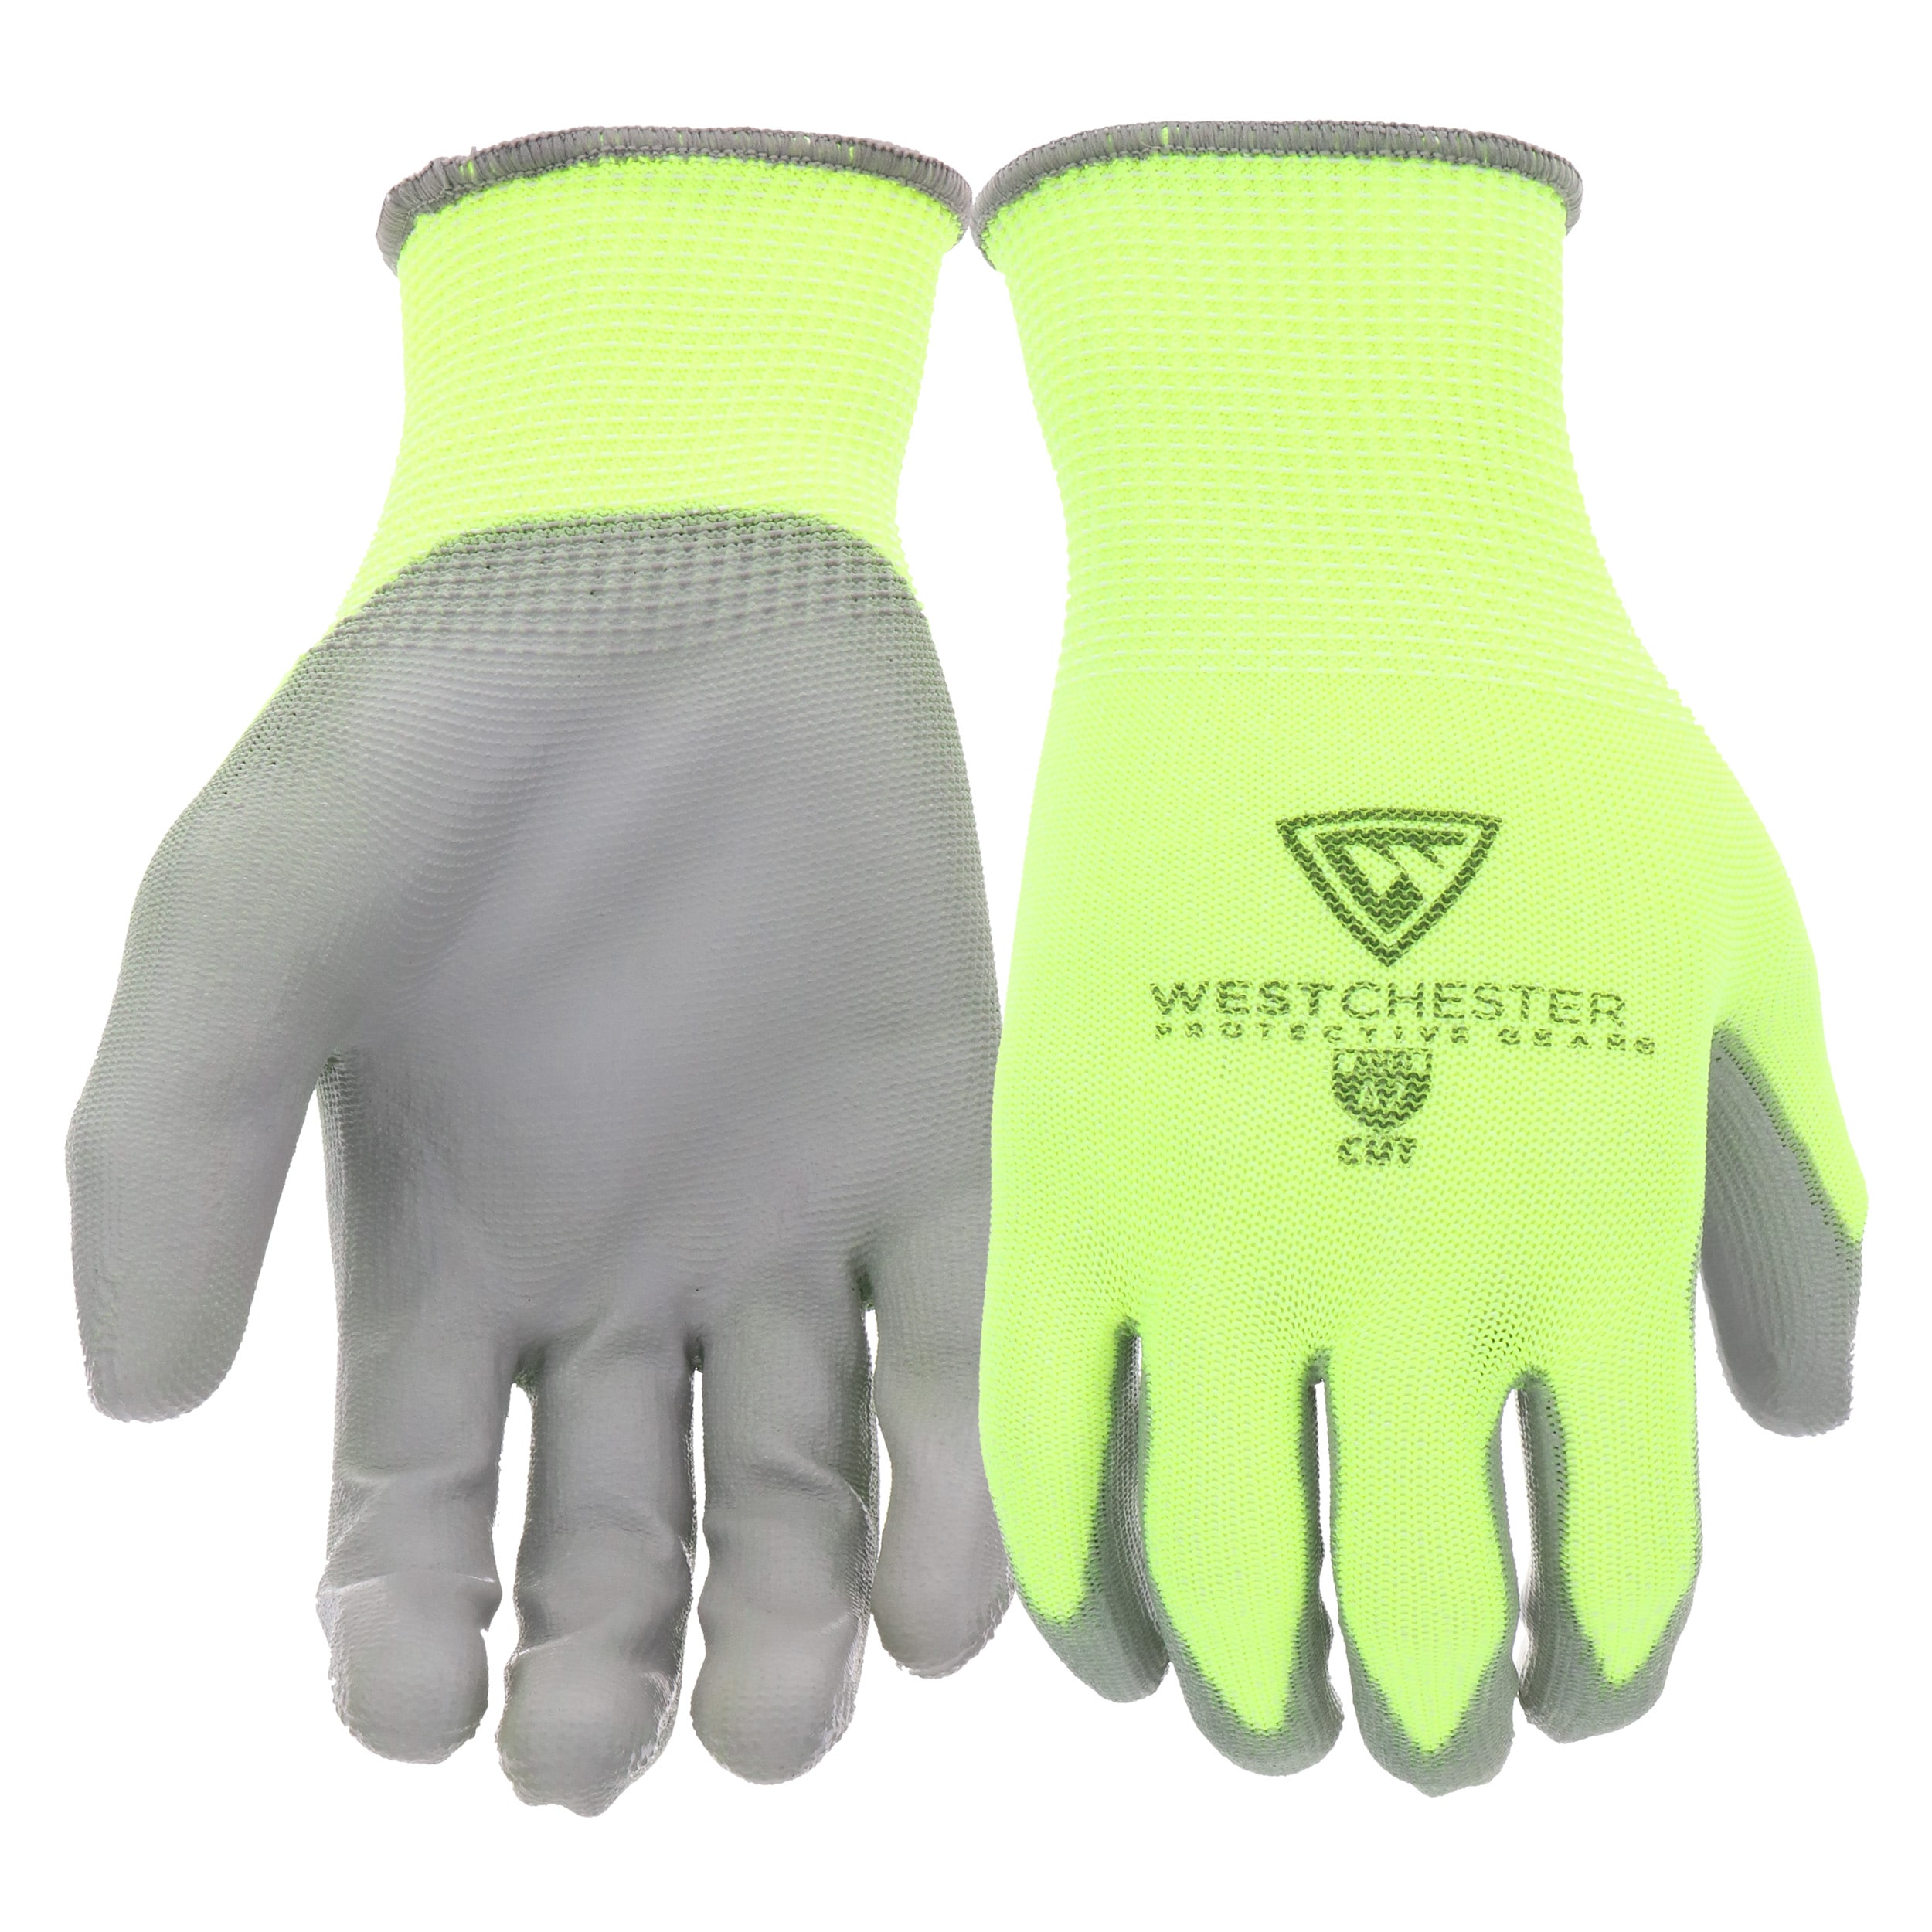   2-Pack Large High-Visibility Cut 2 Resistant Polyurethane Dipped Work Gloves 